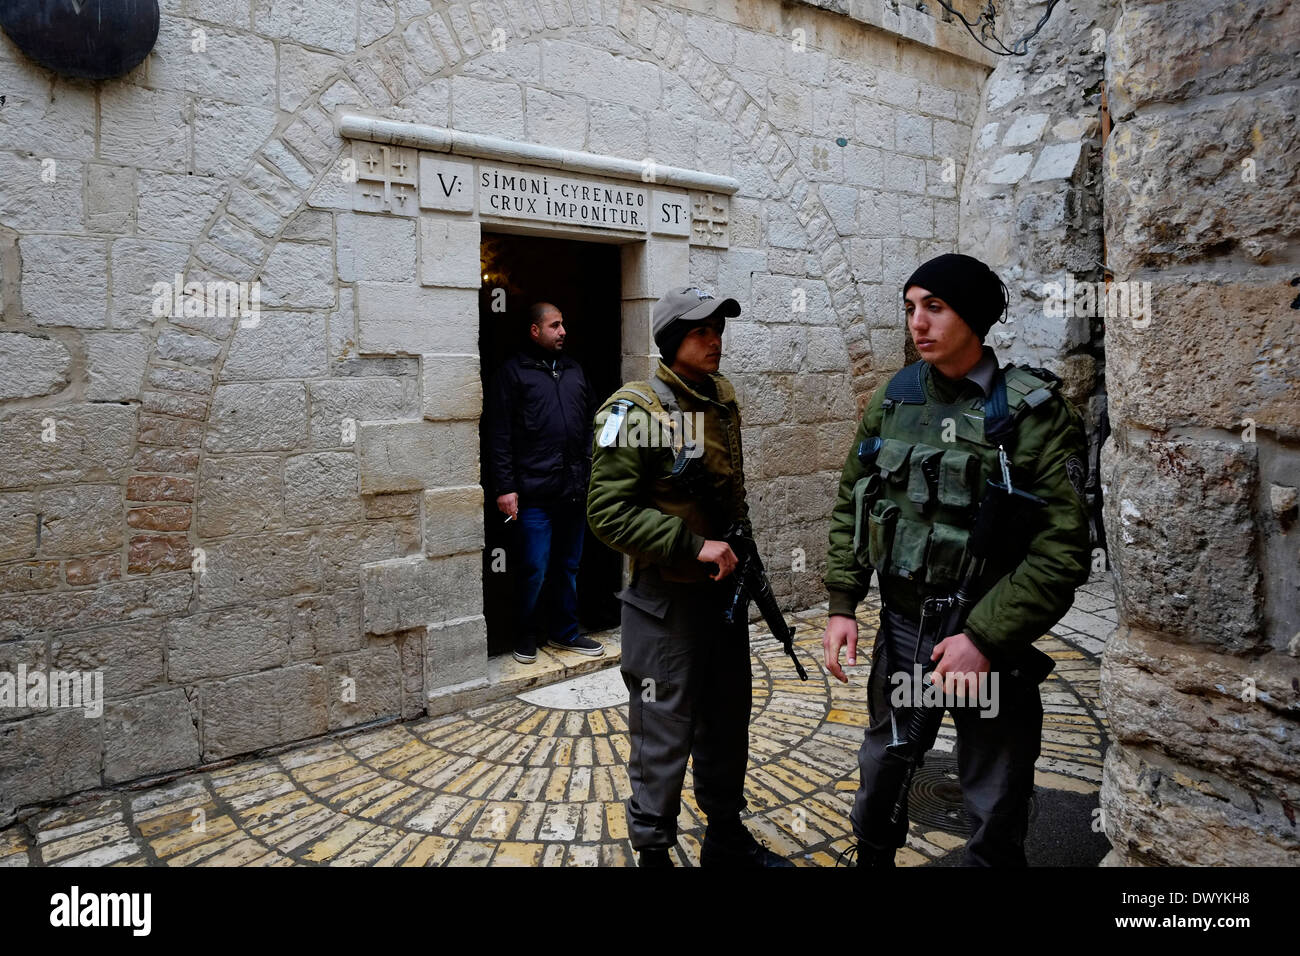 Members of the Israeli Security Forces stand guard next to the Chapel of Simon of Cyrene, at the 5th station of the cross in Via Dolorosa street believed to be the path that Jesus walked on the way to his crucifixion in the Old City. East Jerusalem, Israel Stock Photo